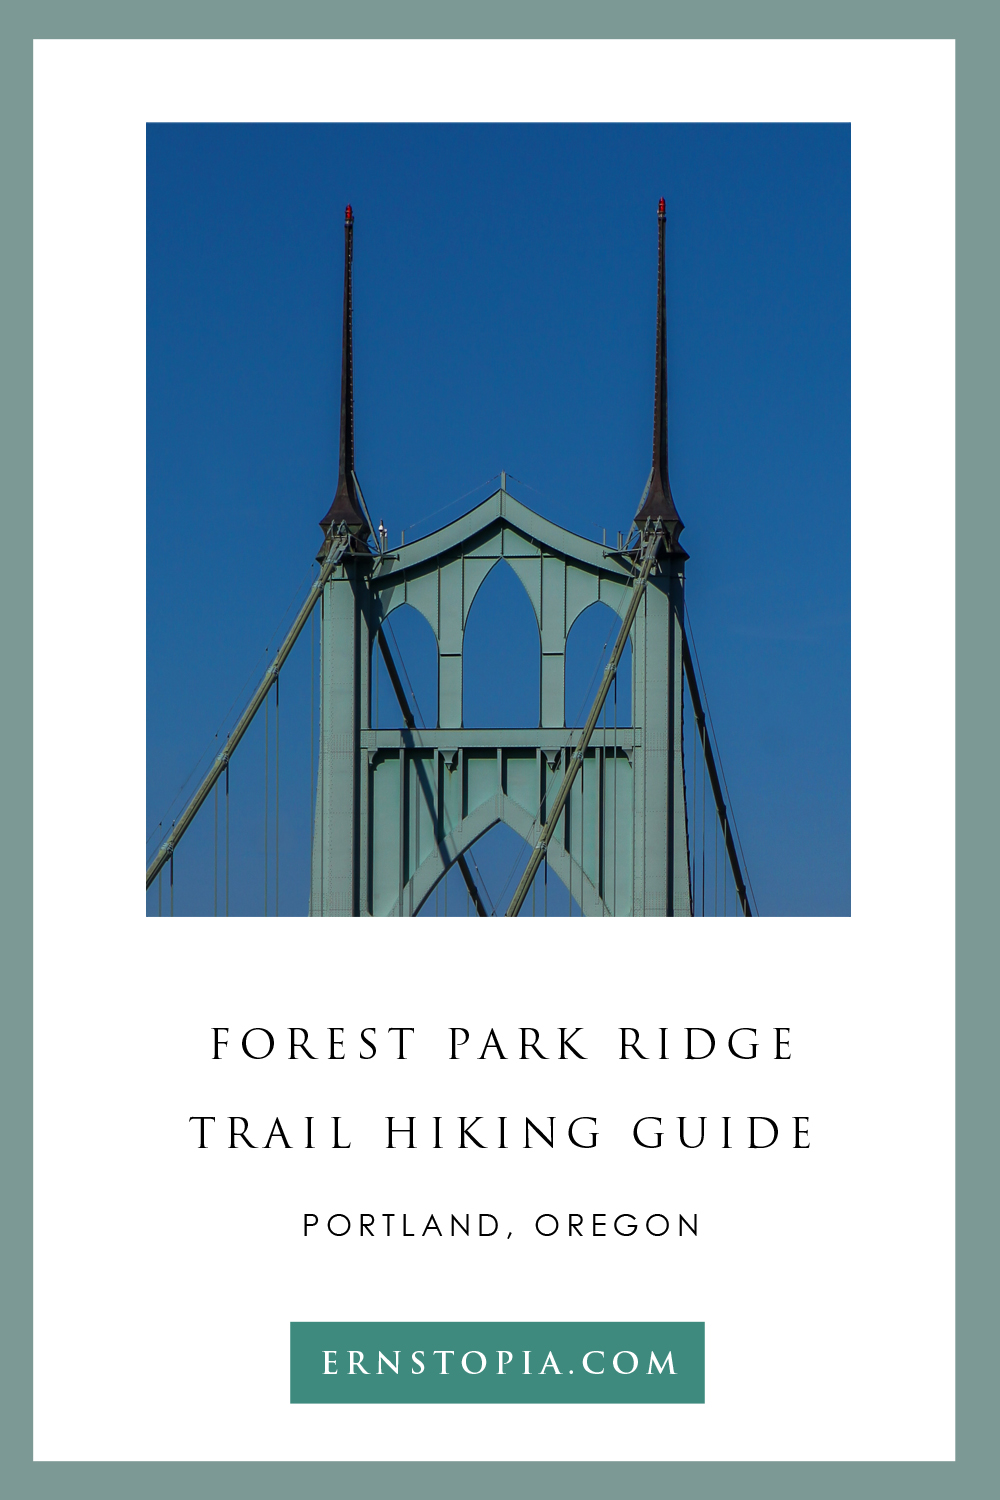 Forest Park RIdge Trail Hiking Guide